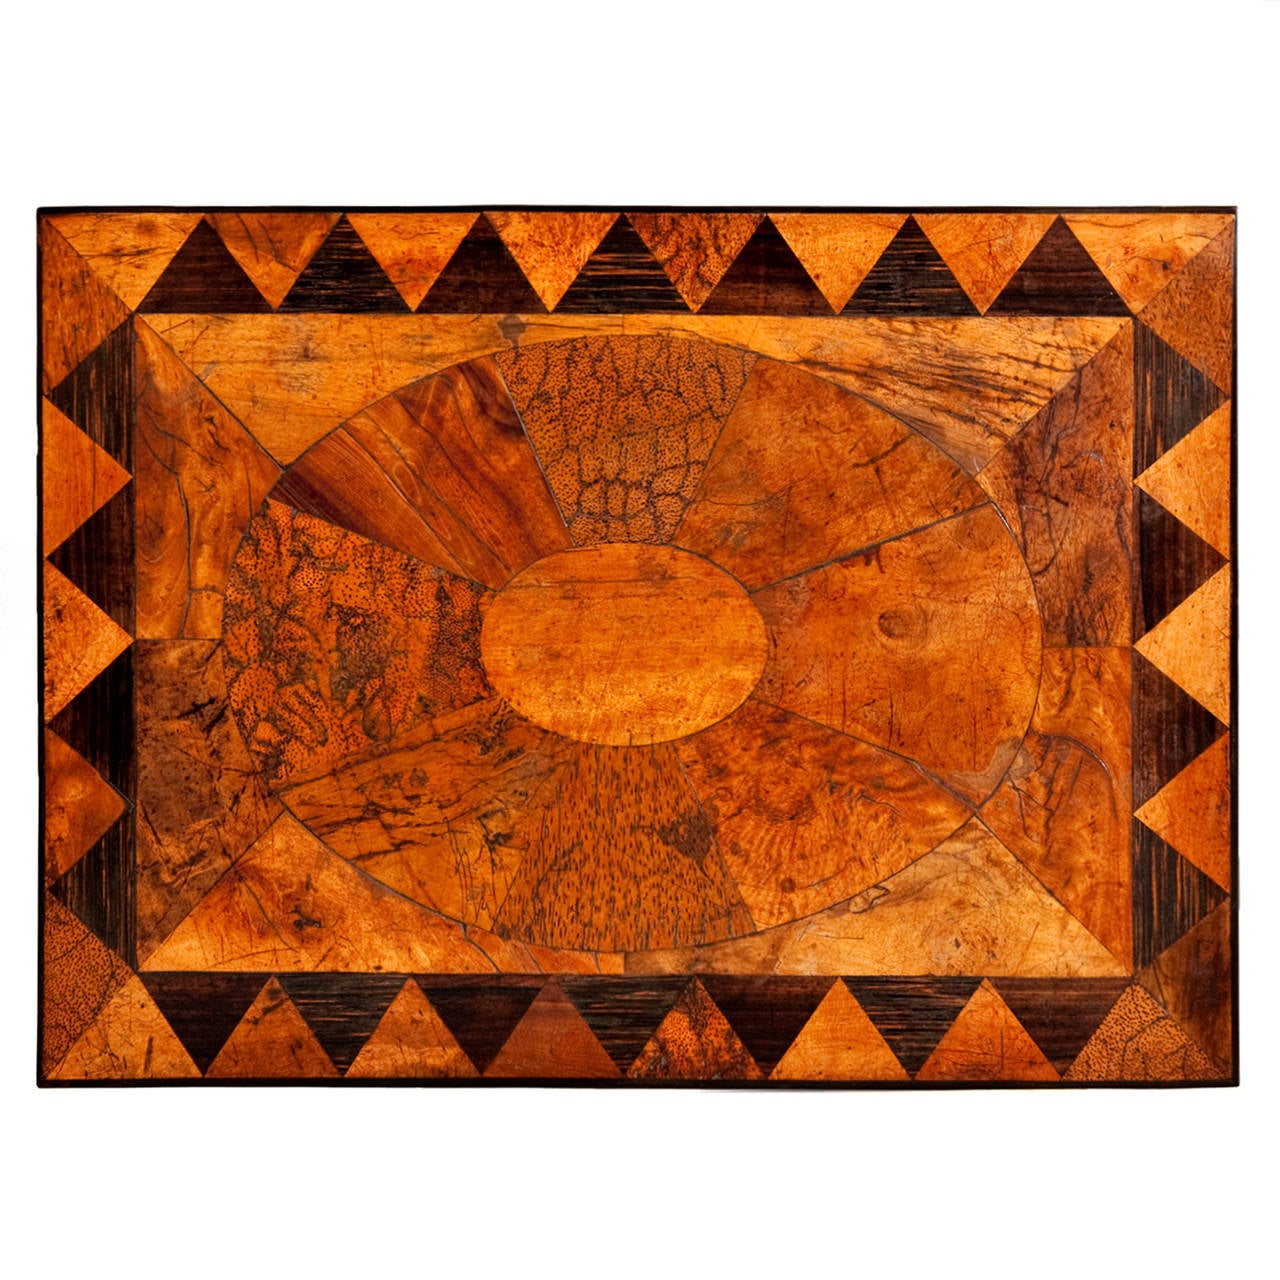 This occasional, lamp or end table is typical of a group of high quality, vibrantly-inlaid tables produced in the Galle District from the early 19th century, based on Regency designs, displaying a wide variety of indigenous timbers in a distinctive